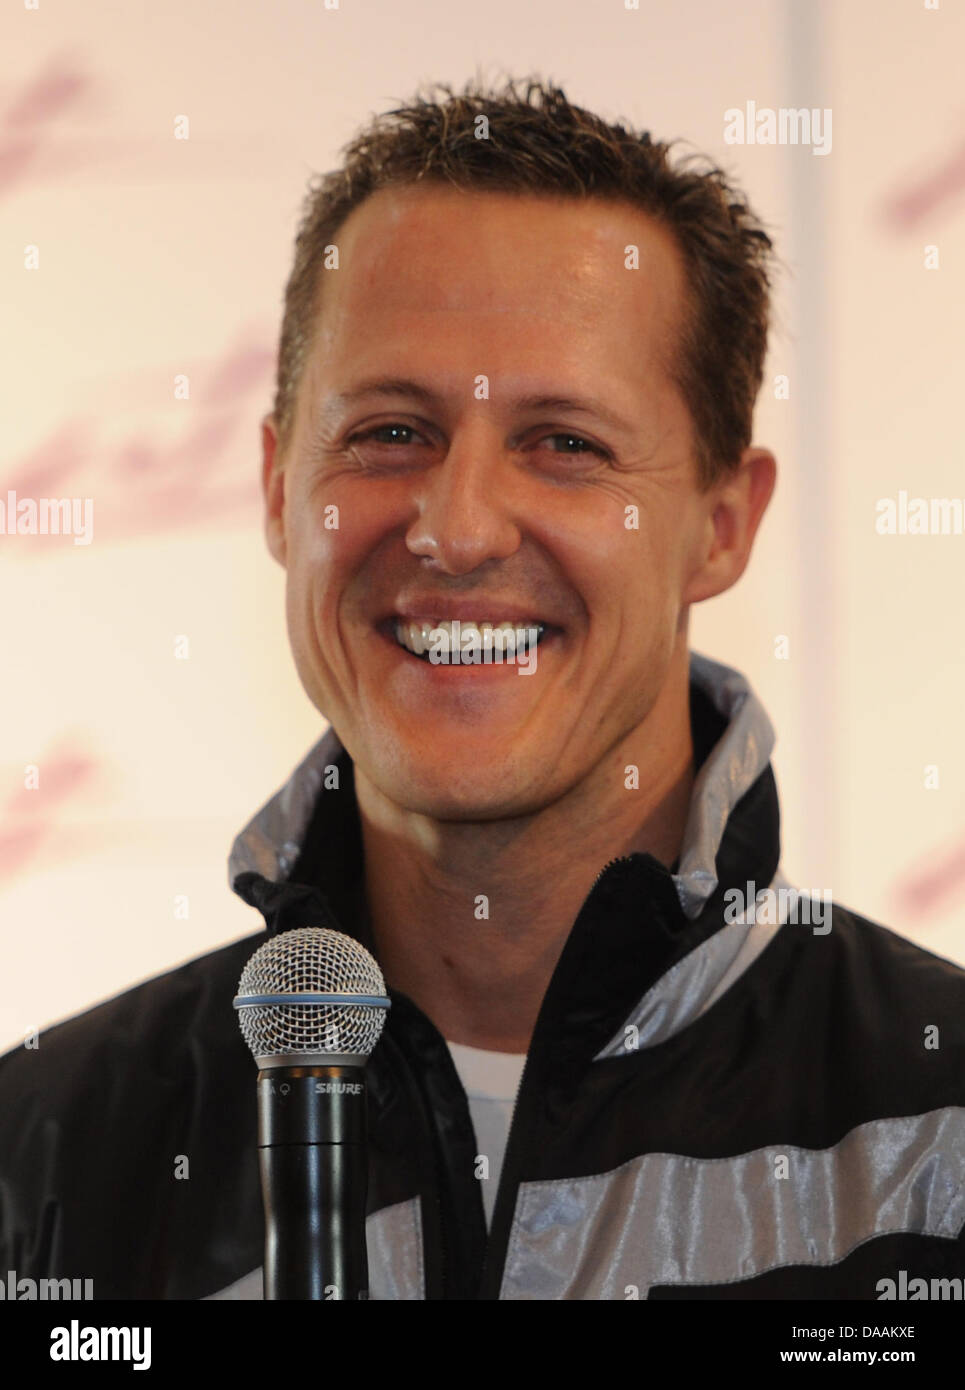 Formula One pilot Michael Schumacher visits the sporting goods trade fair ispo iN Munich, Germany, 06 February 2011. 2267 exhibitors from 49 countries participate in the trade show that runs until 09 February. Photo: Marc Mueller Stock Photo